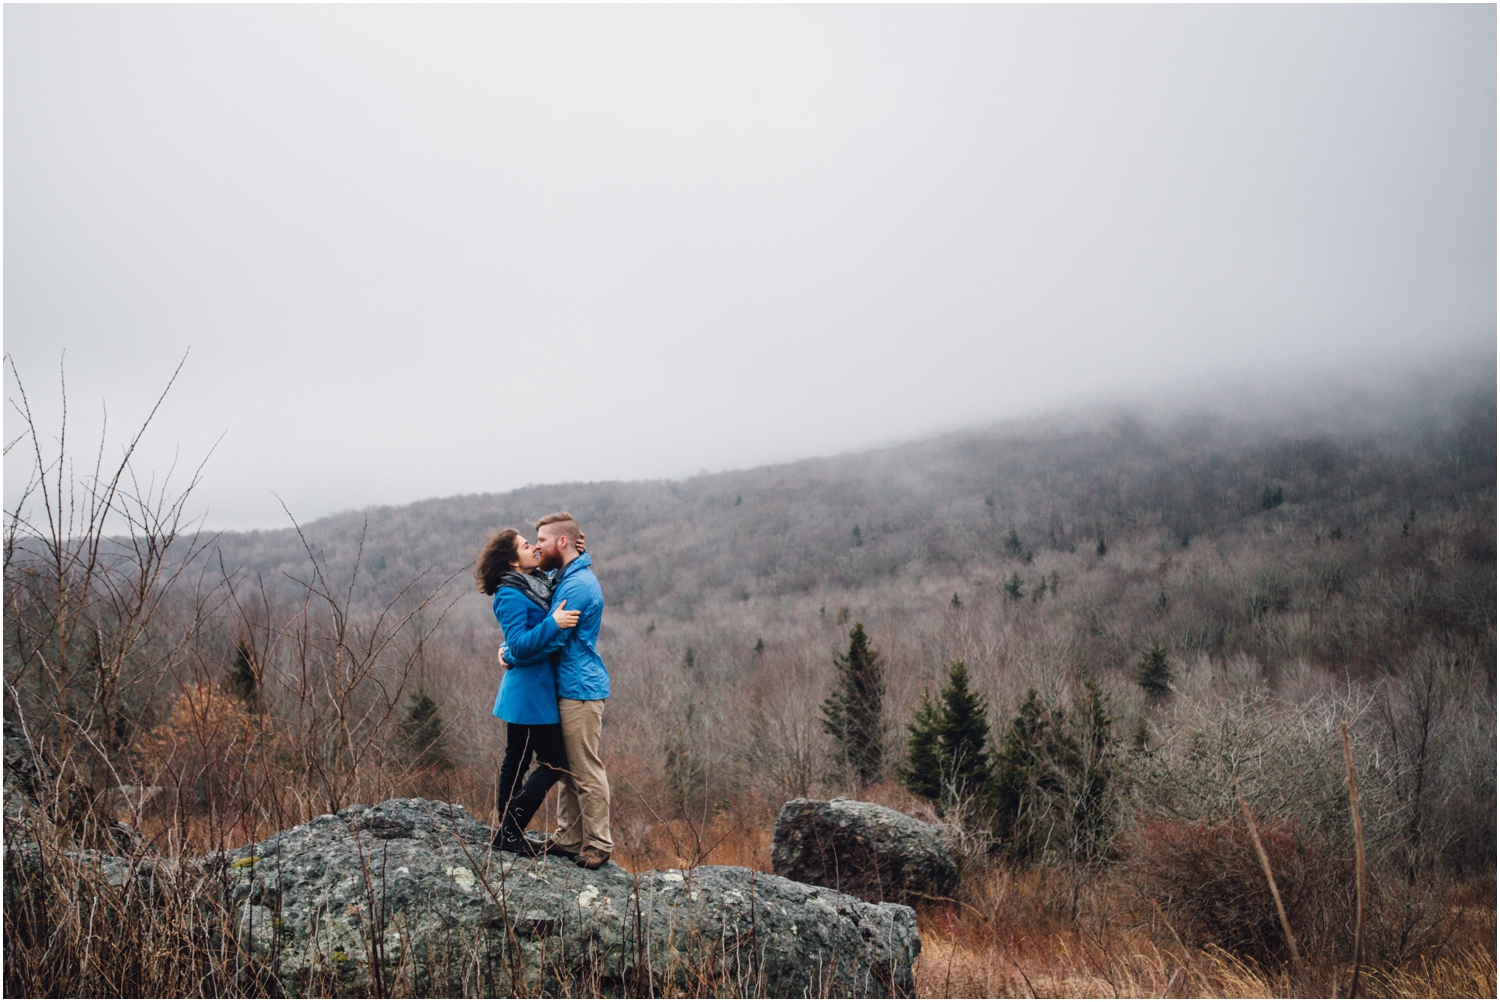 katy-sergent-photography-grayson-highlands-engagement-session-mouth-of-wilson-virginia-damascus-appalachian-trail-tennessee-wedding-elopement_0020.jpg